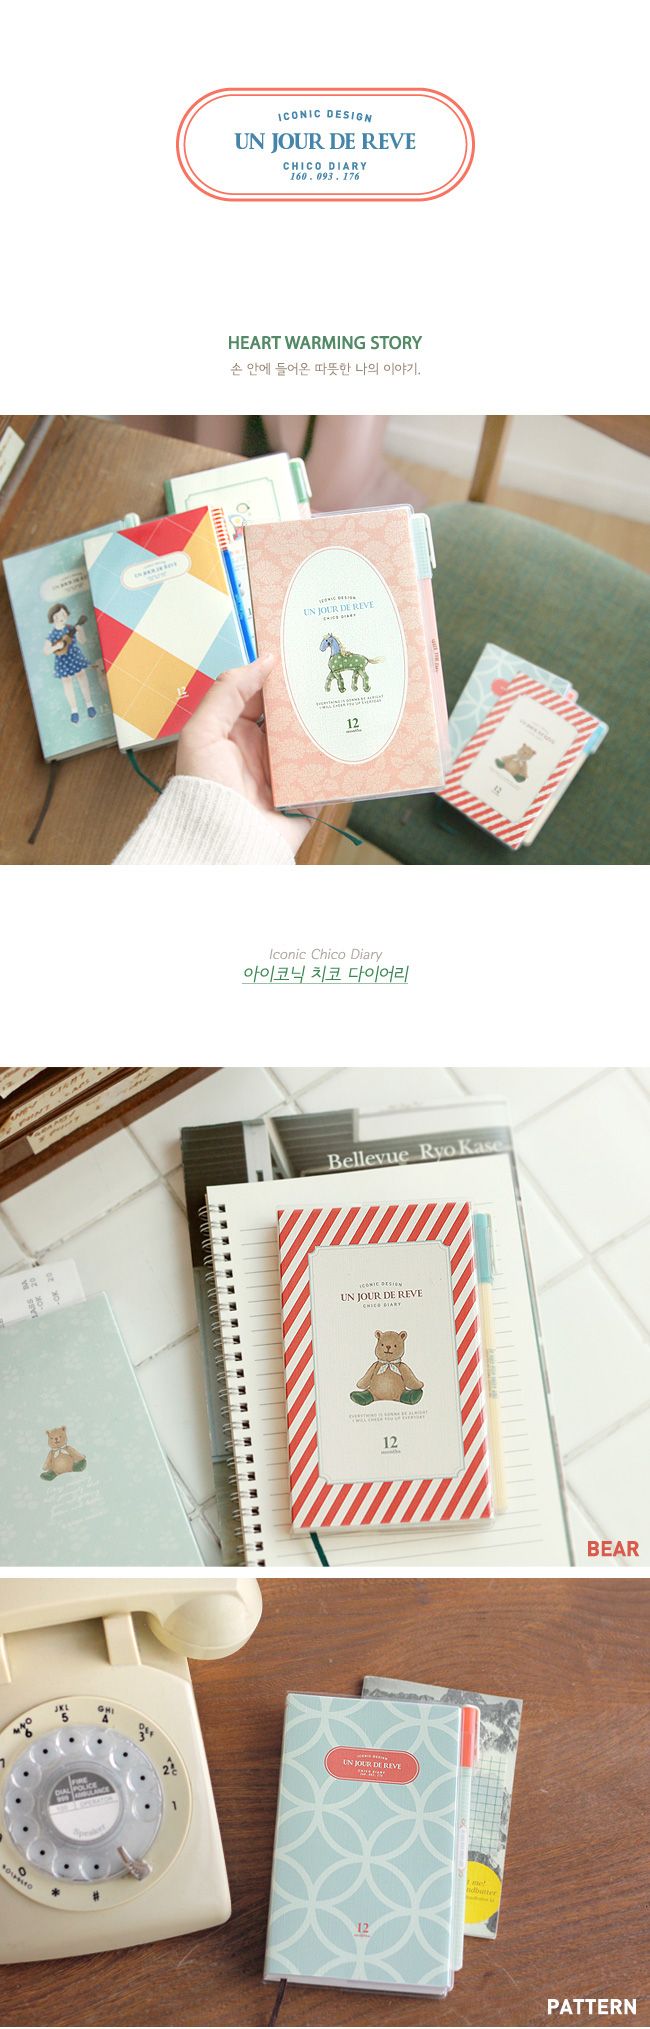   Diary Journal Weekly Schedule Planner Agenda_Iconic Chico Diary + Pen